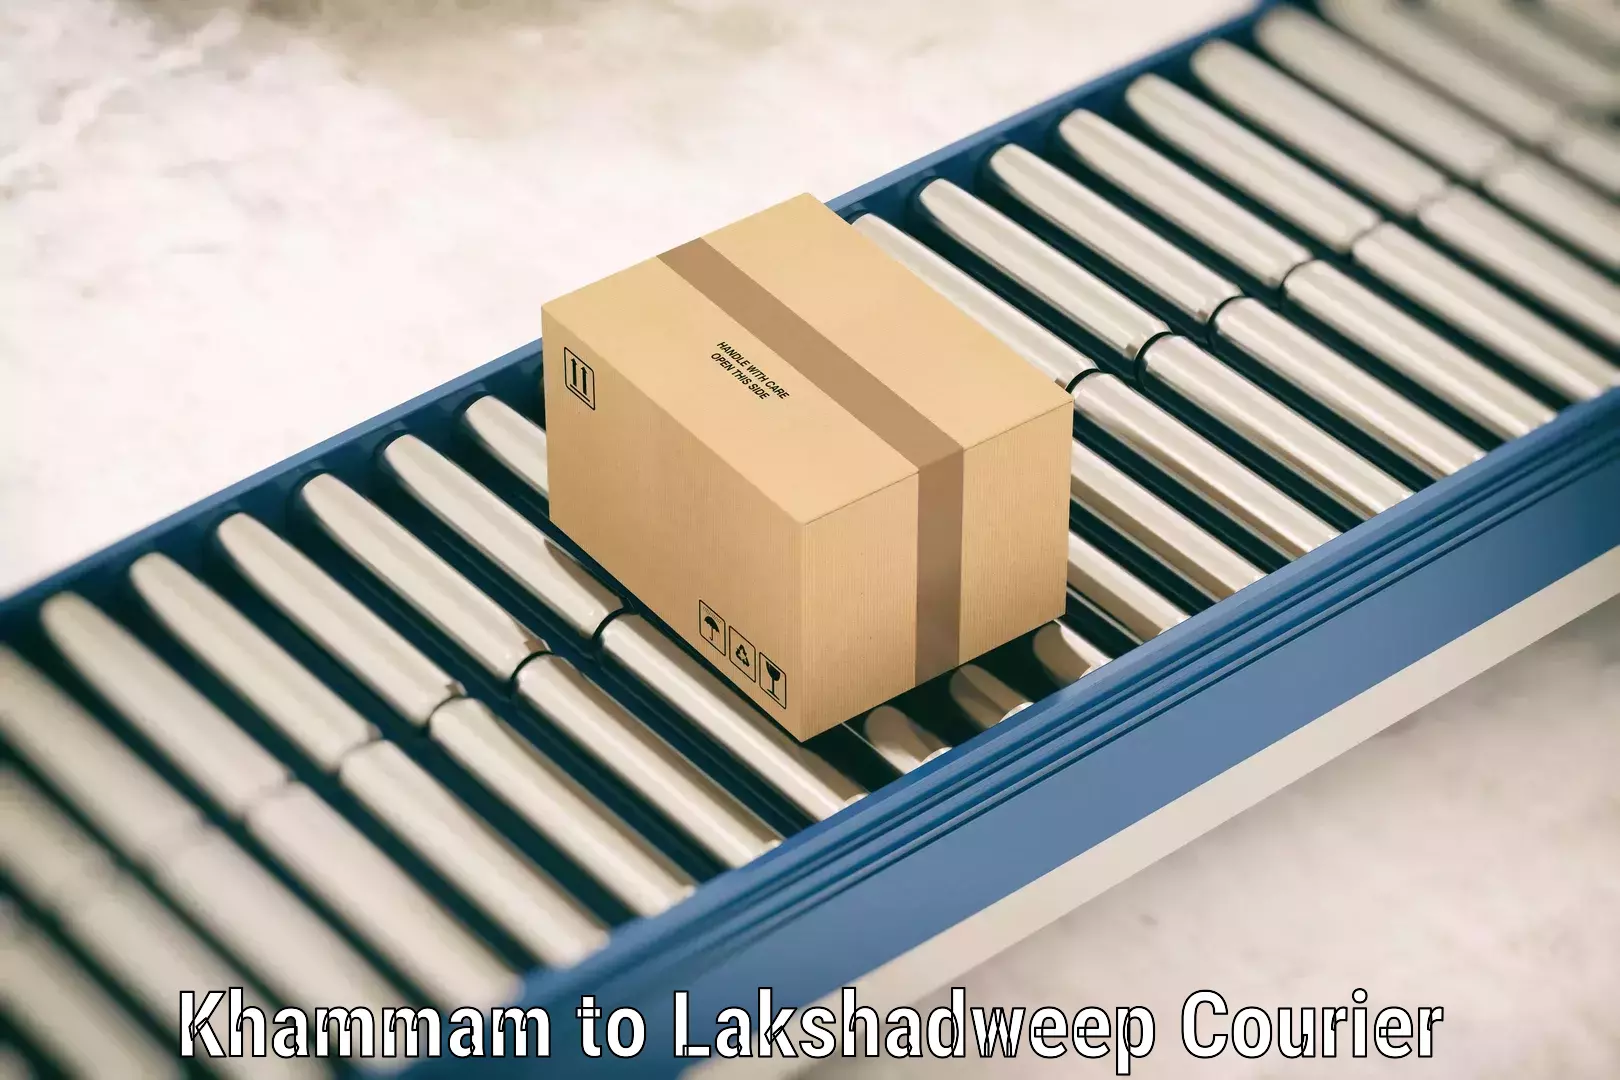 Instant baggage transport quote Khammam to Lakshadweep